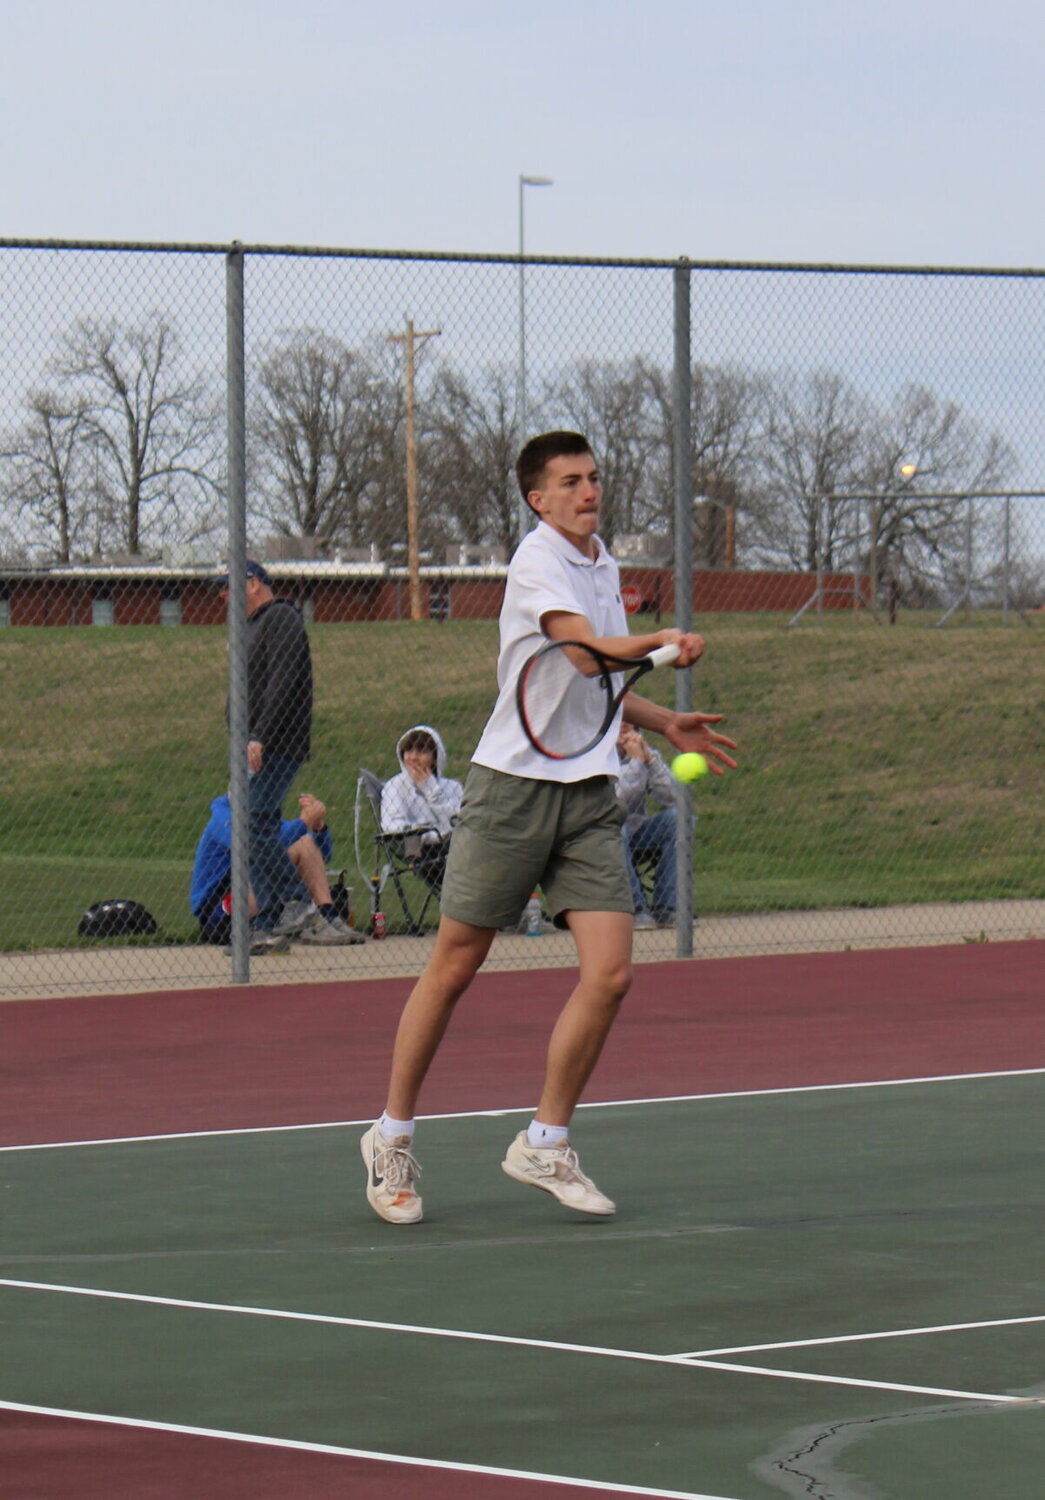 Pictured making a return and later on winning in his match is Senior Roni Yakolev.